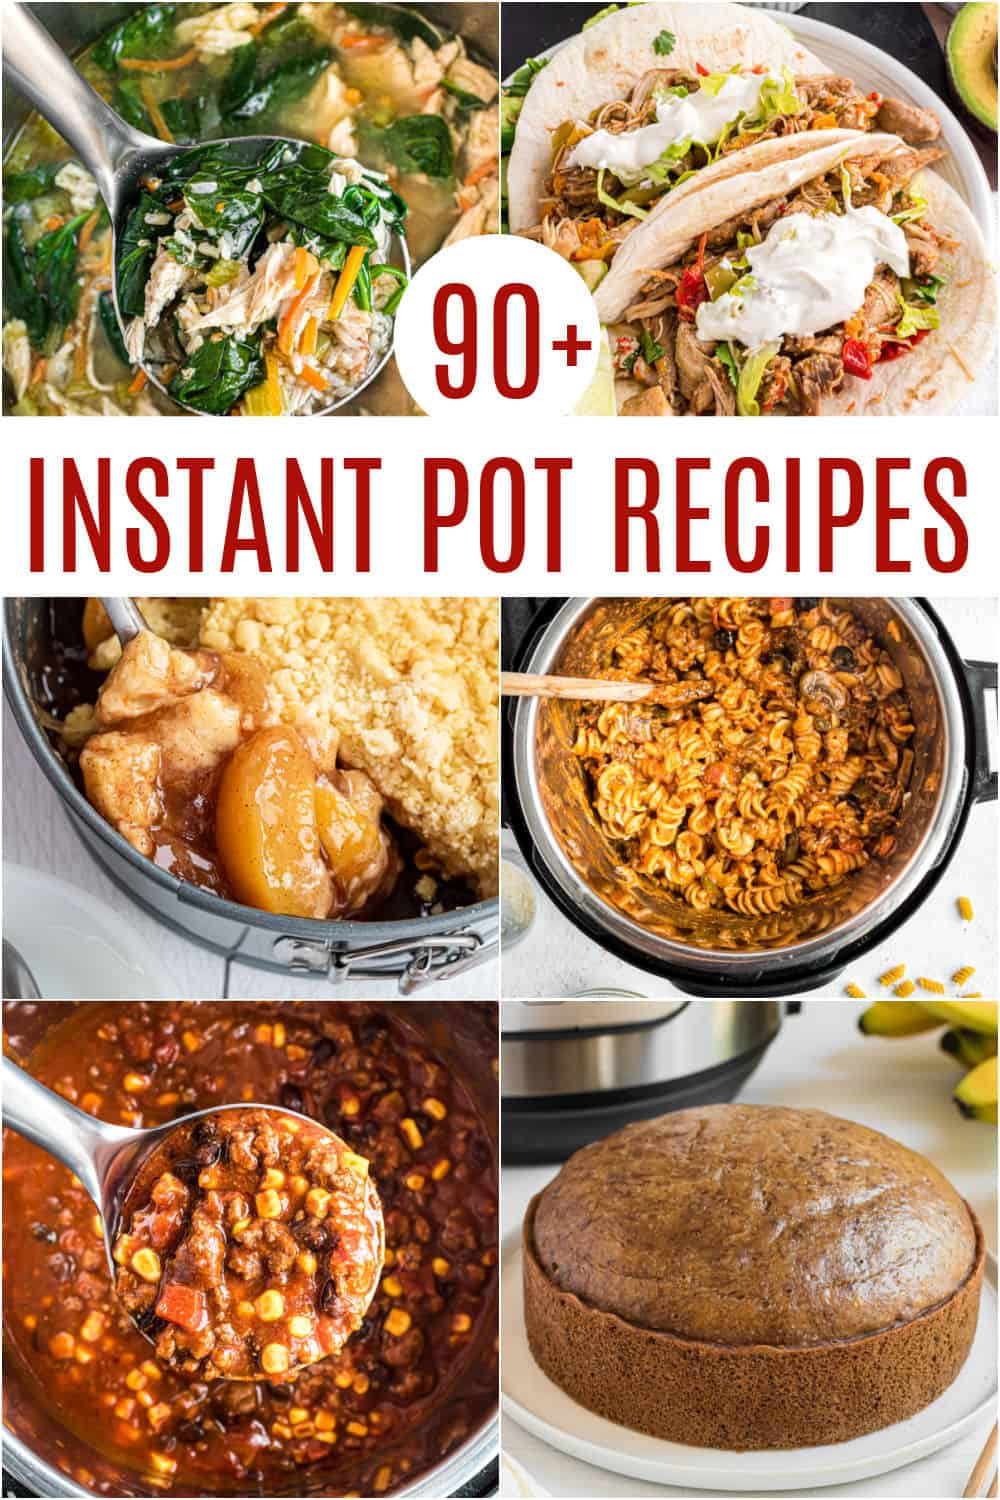 90+ of the BEST Instant Pot Recipes - Shugary Sweets